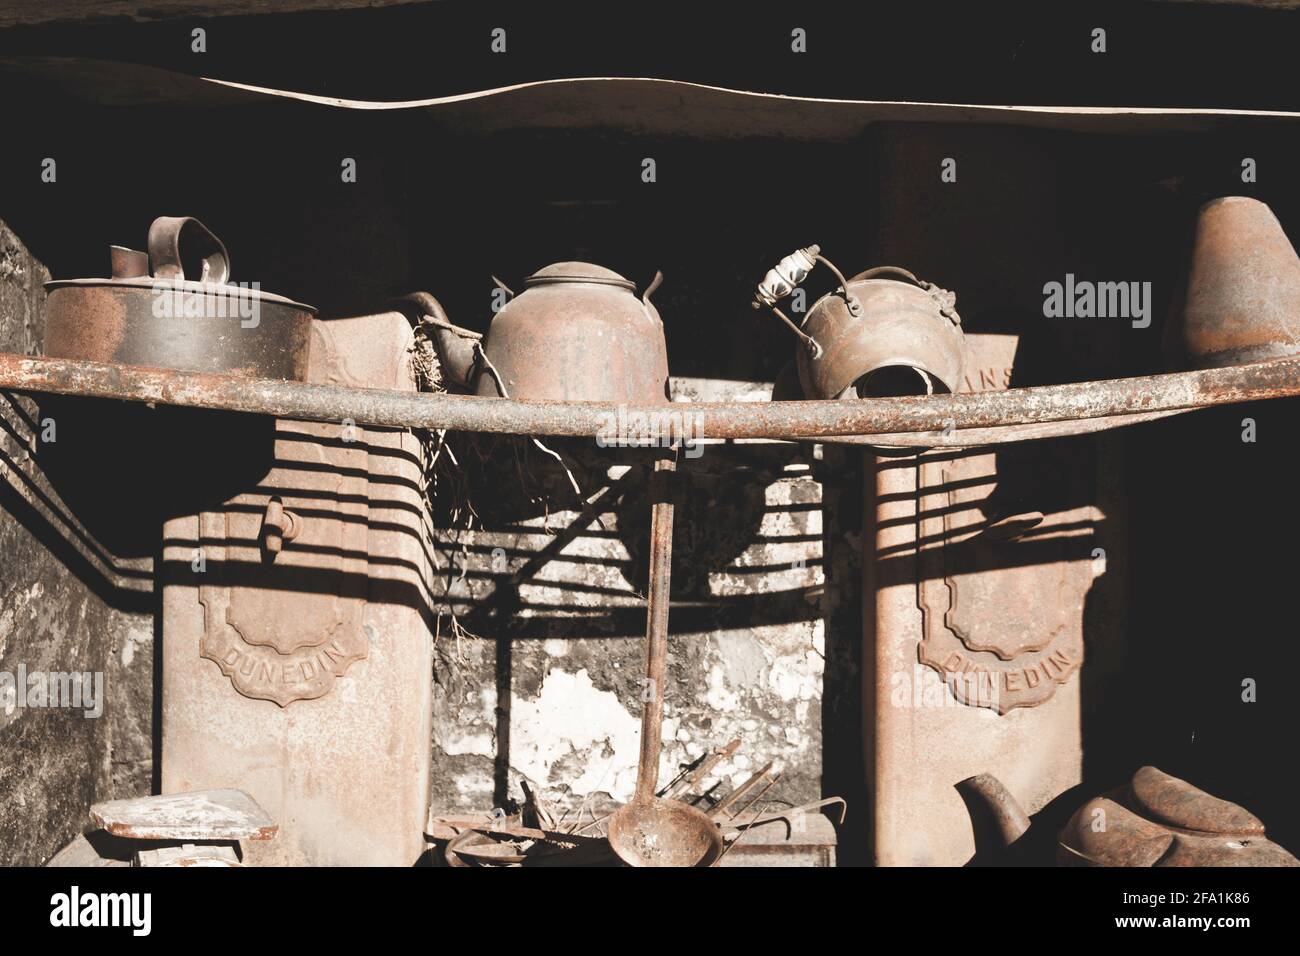 Pots and pans on rack in old rusty stove Stock Photo